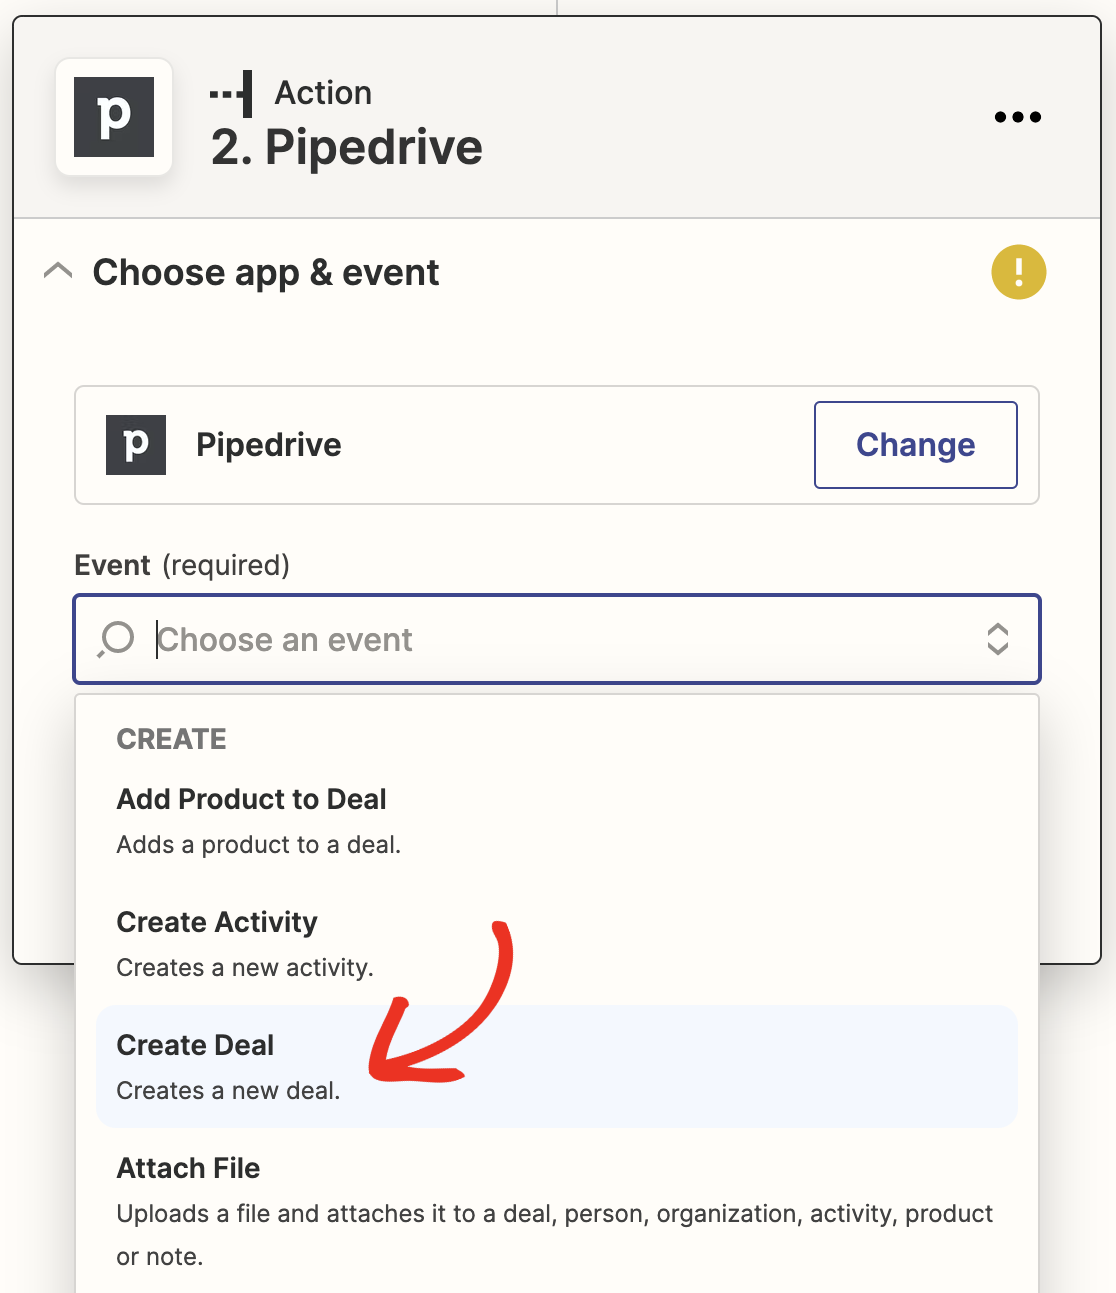 Selecting Create Deal as the action app event for Pipedrive in Zapier